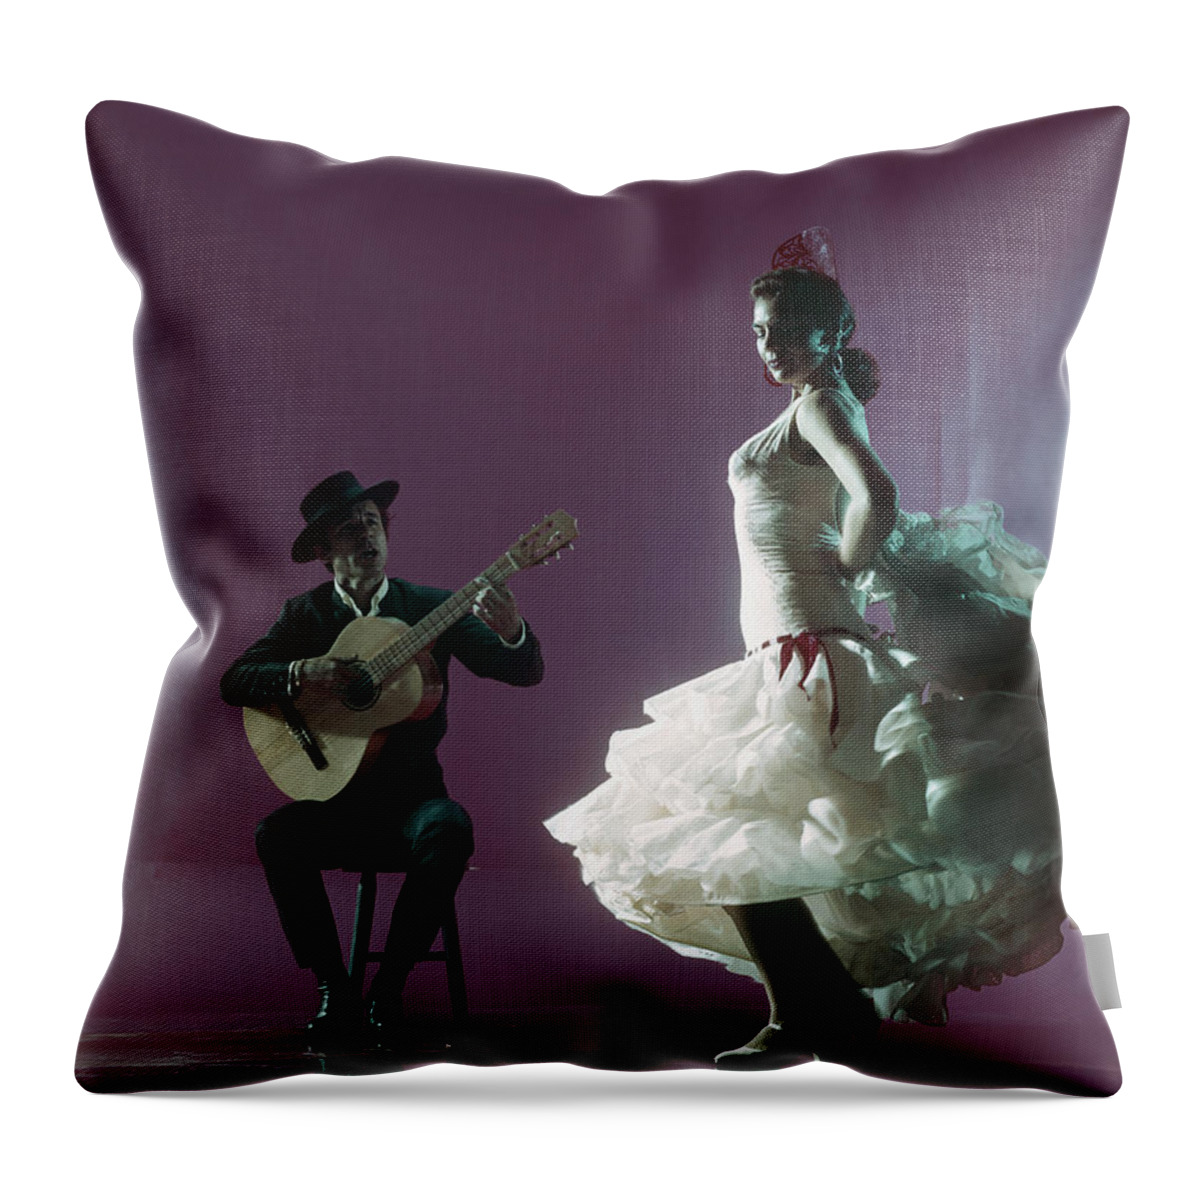 People Throw Pillow featuring the photograph Guitarist Playing Guitar And Woman #1 by Tom Kelley Archive